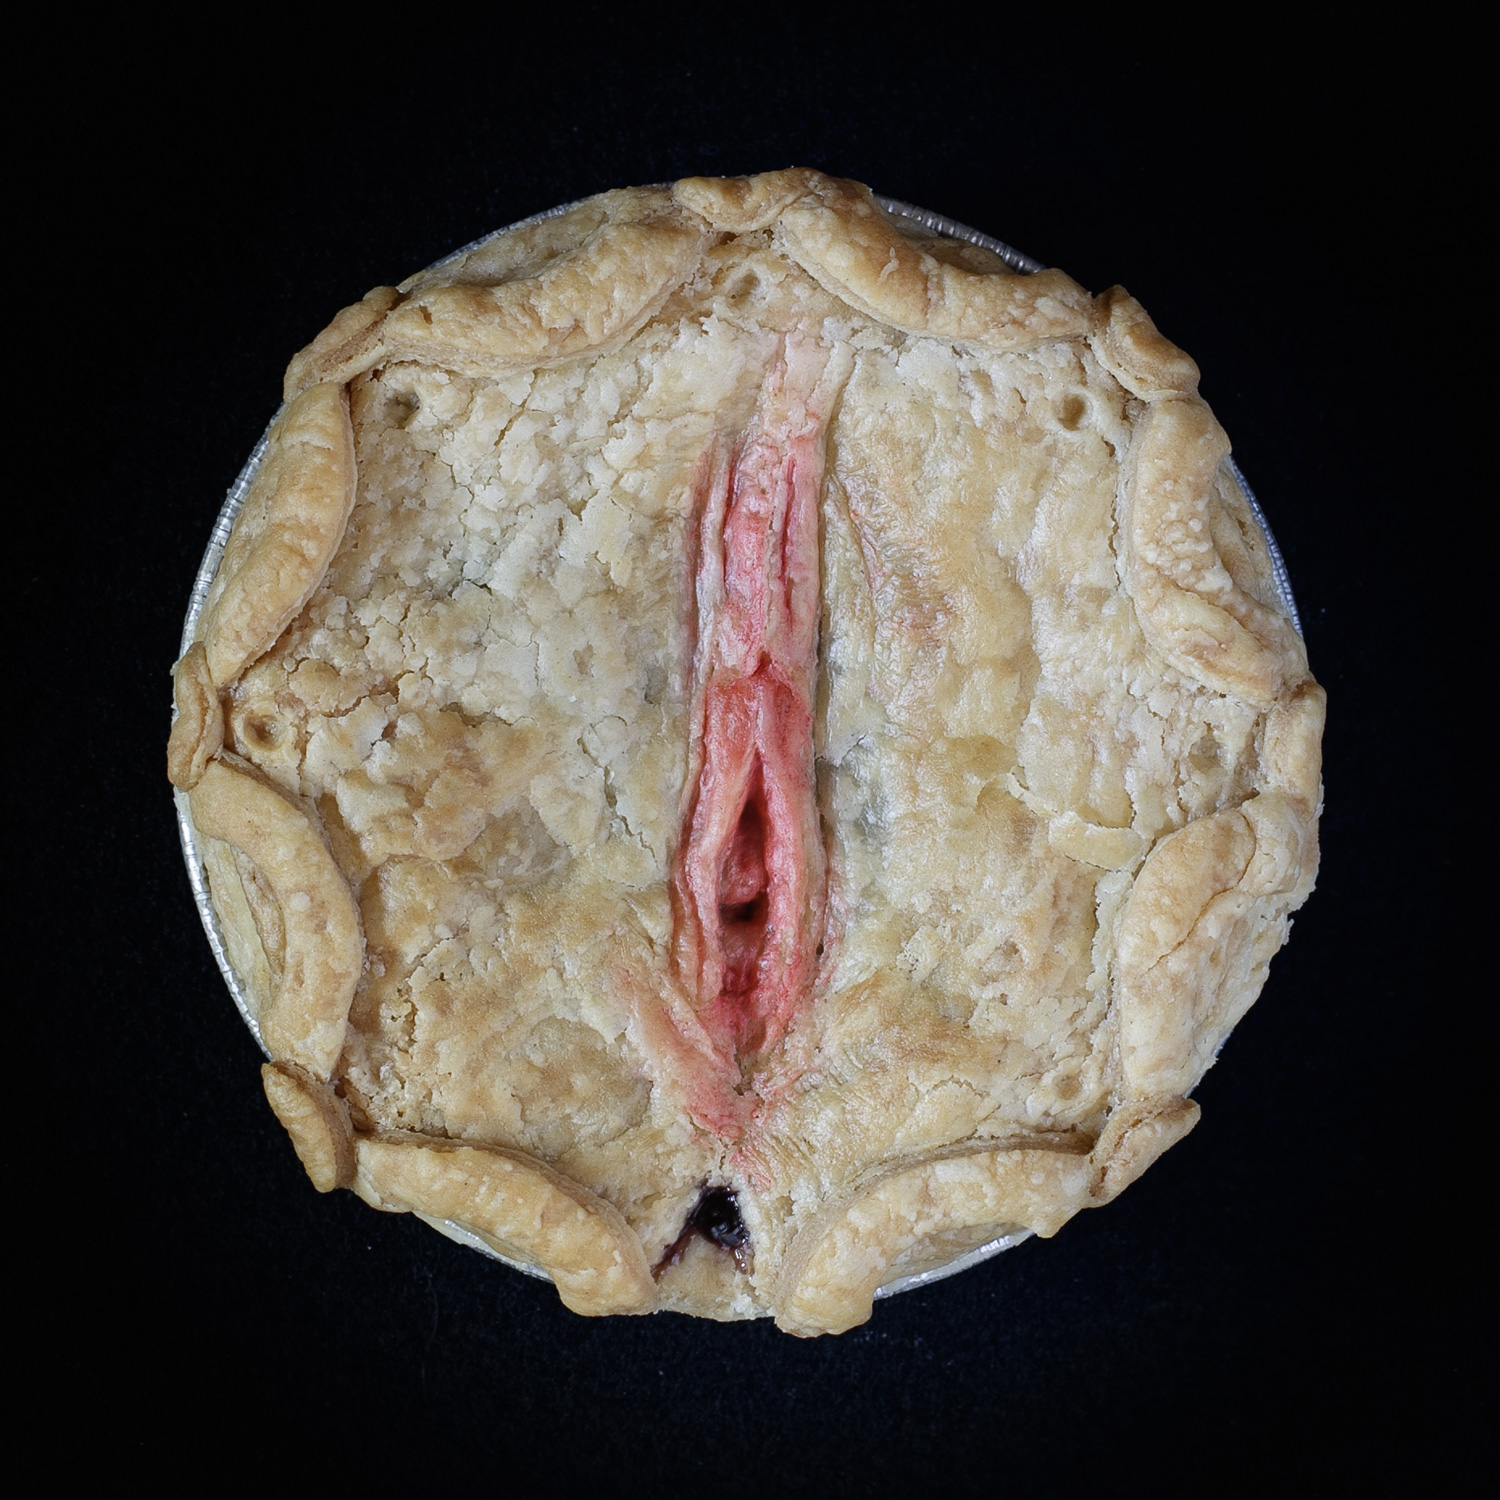 Baked Blueberry Pie with pie crust art made that looks like a pink vulva. 